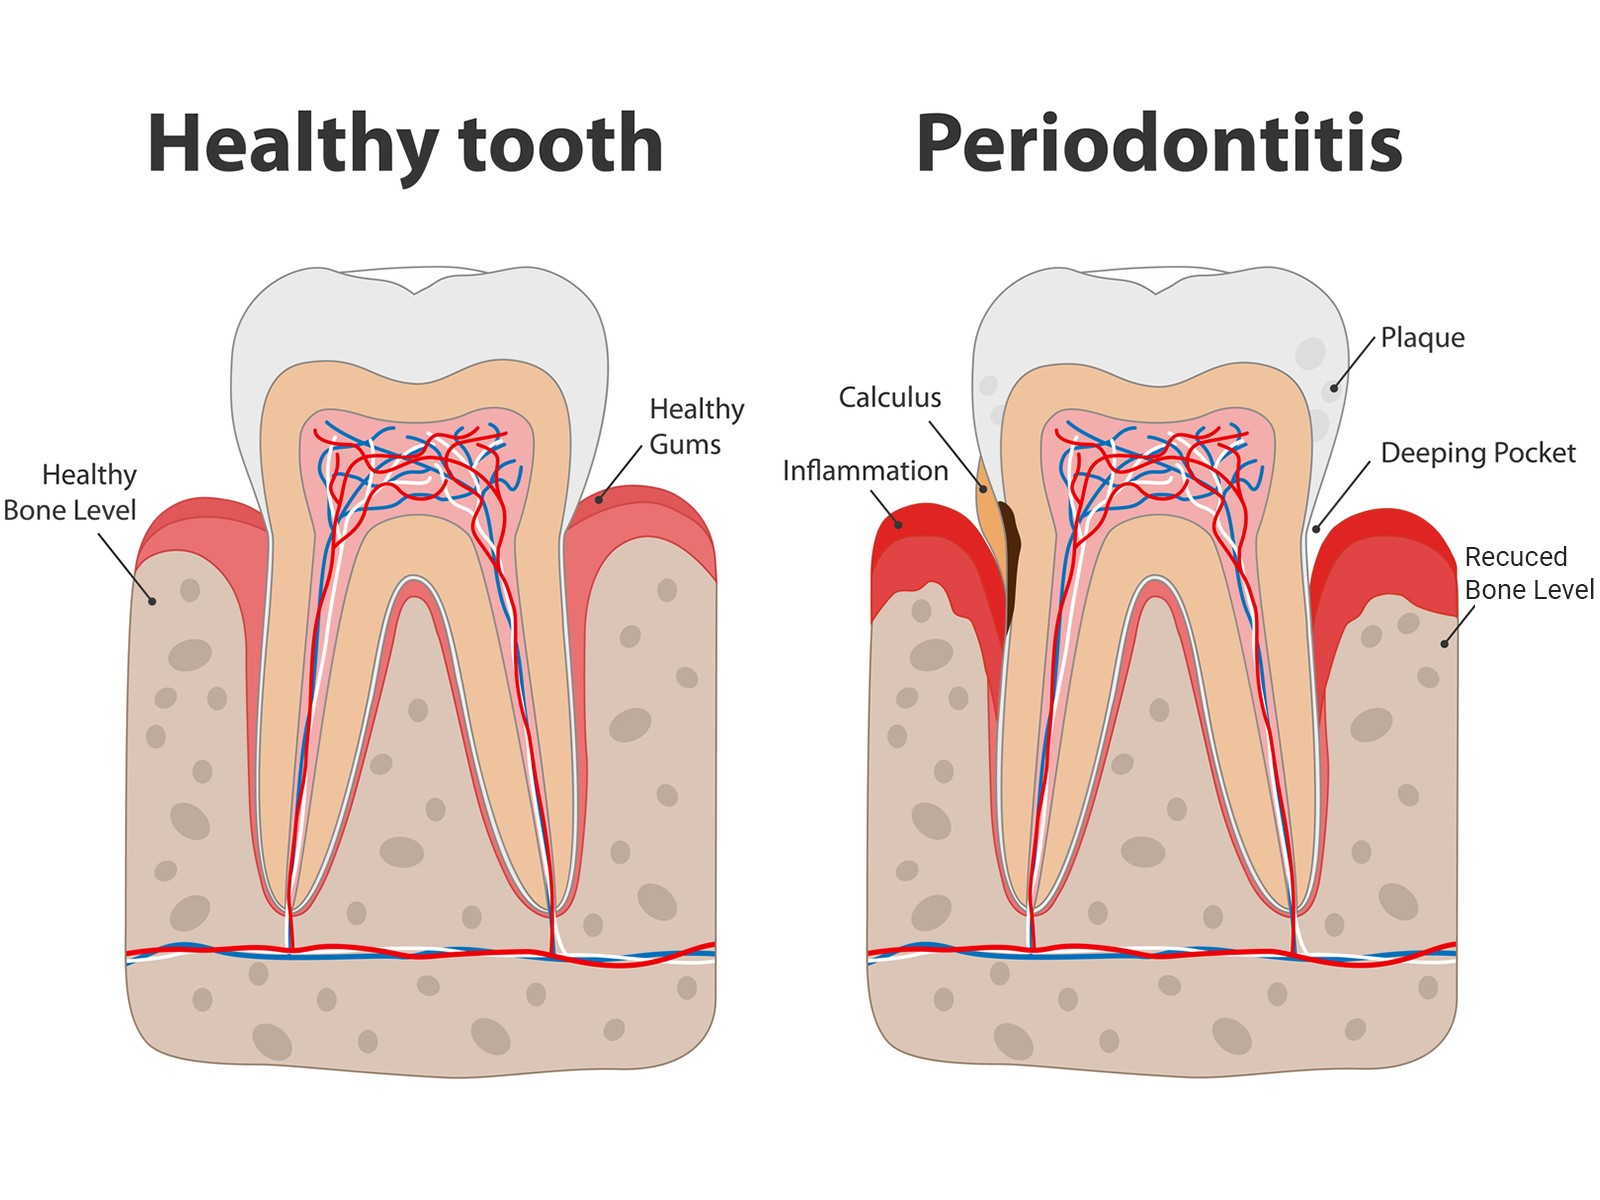 How to know when my periodontal disease is worse?